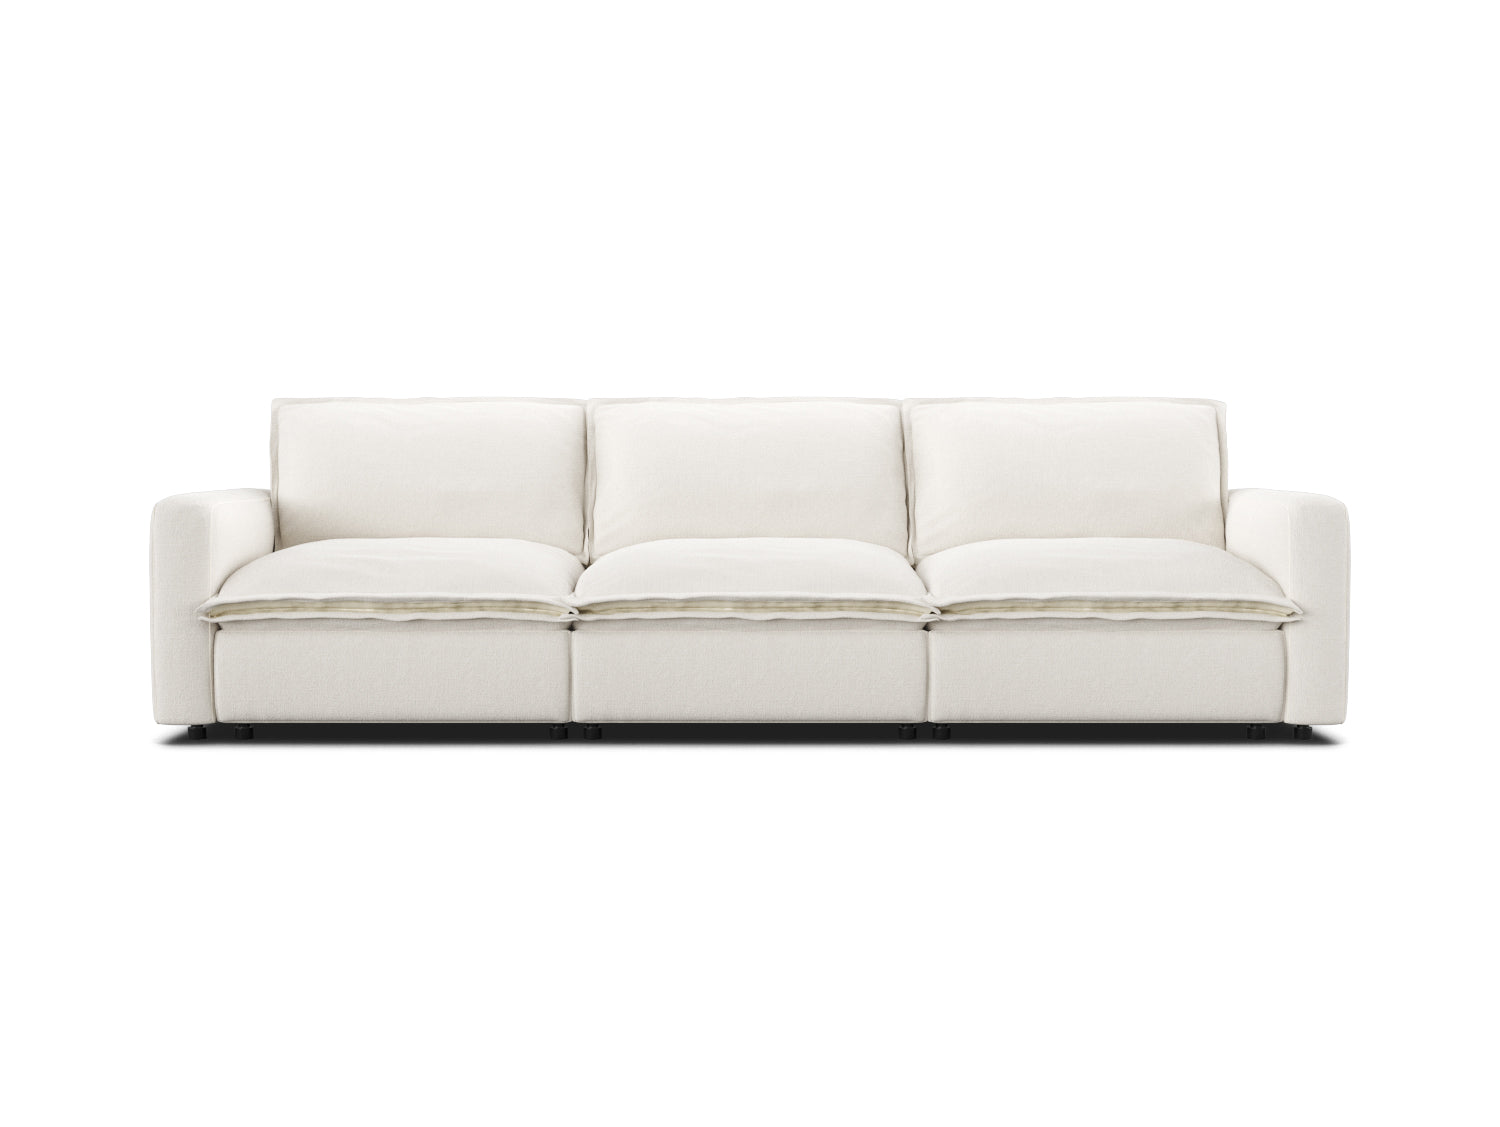 white 3 seat sectional couch, modular